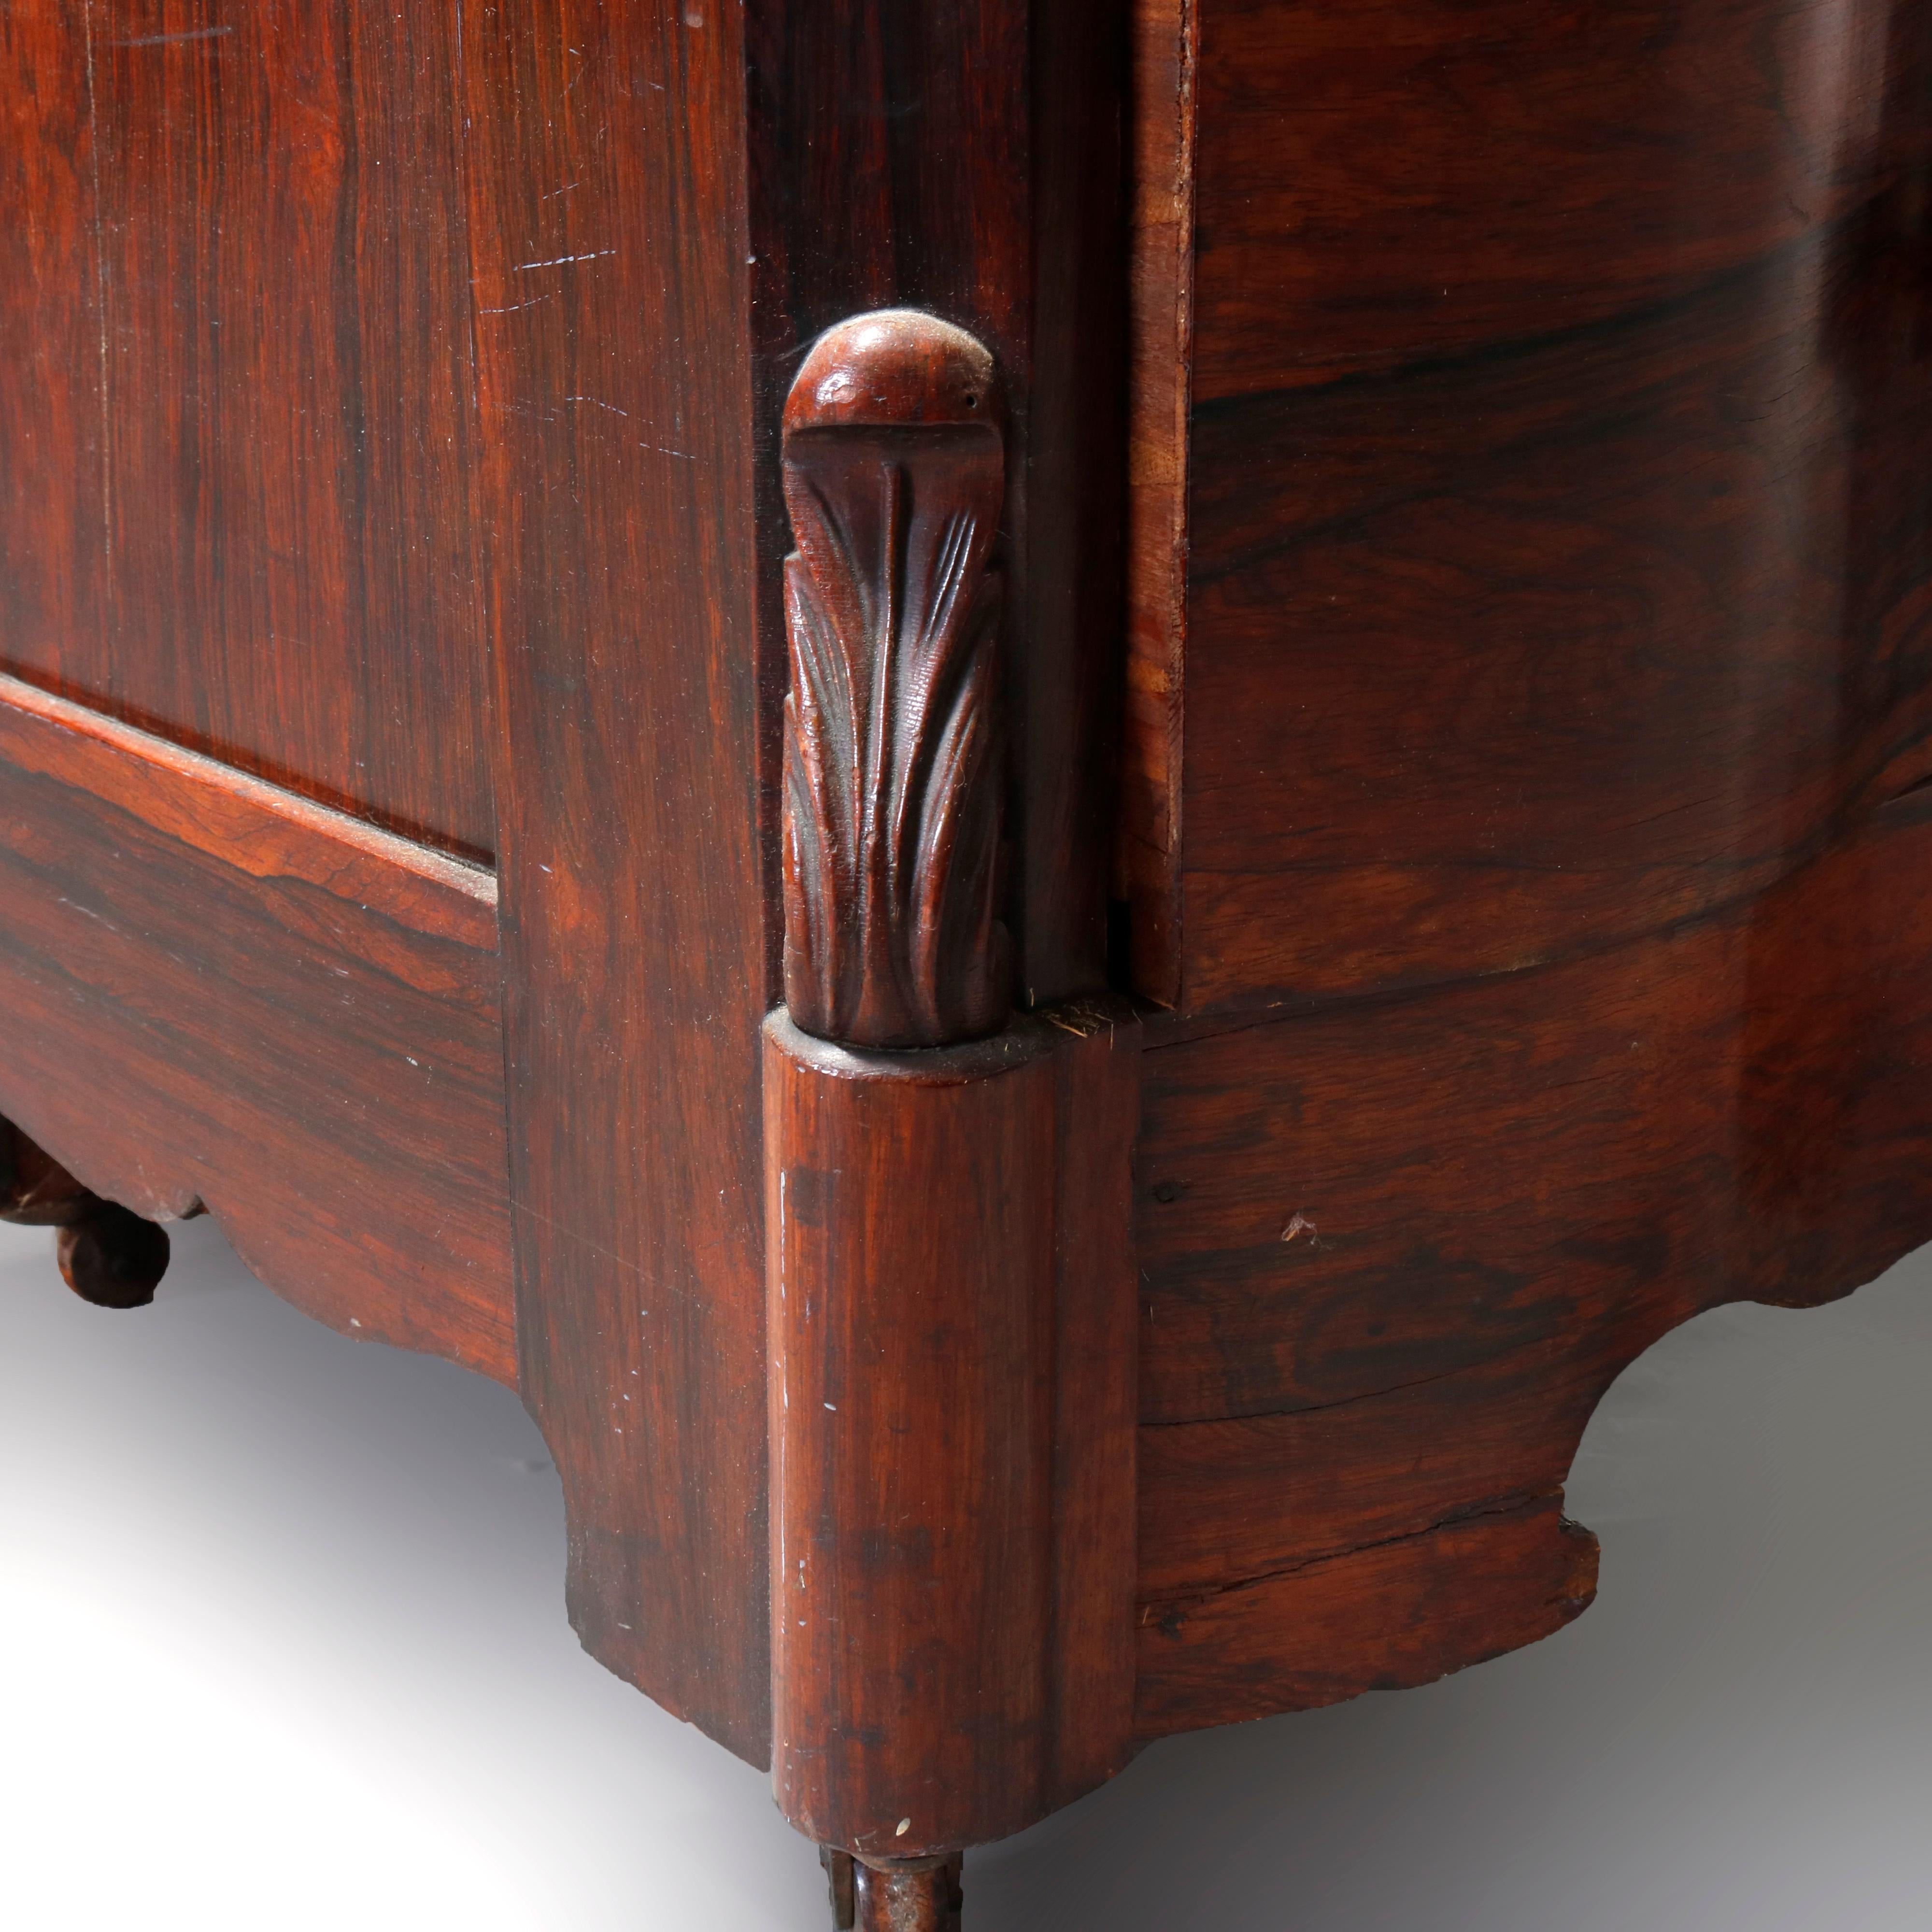 American Antique Victorian Rococo Revival Carved Rosewood Marble-Top Dresser, circa 1860